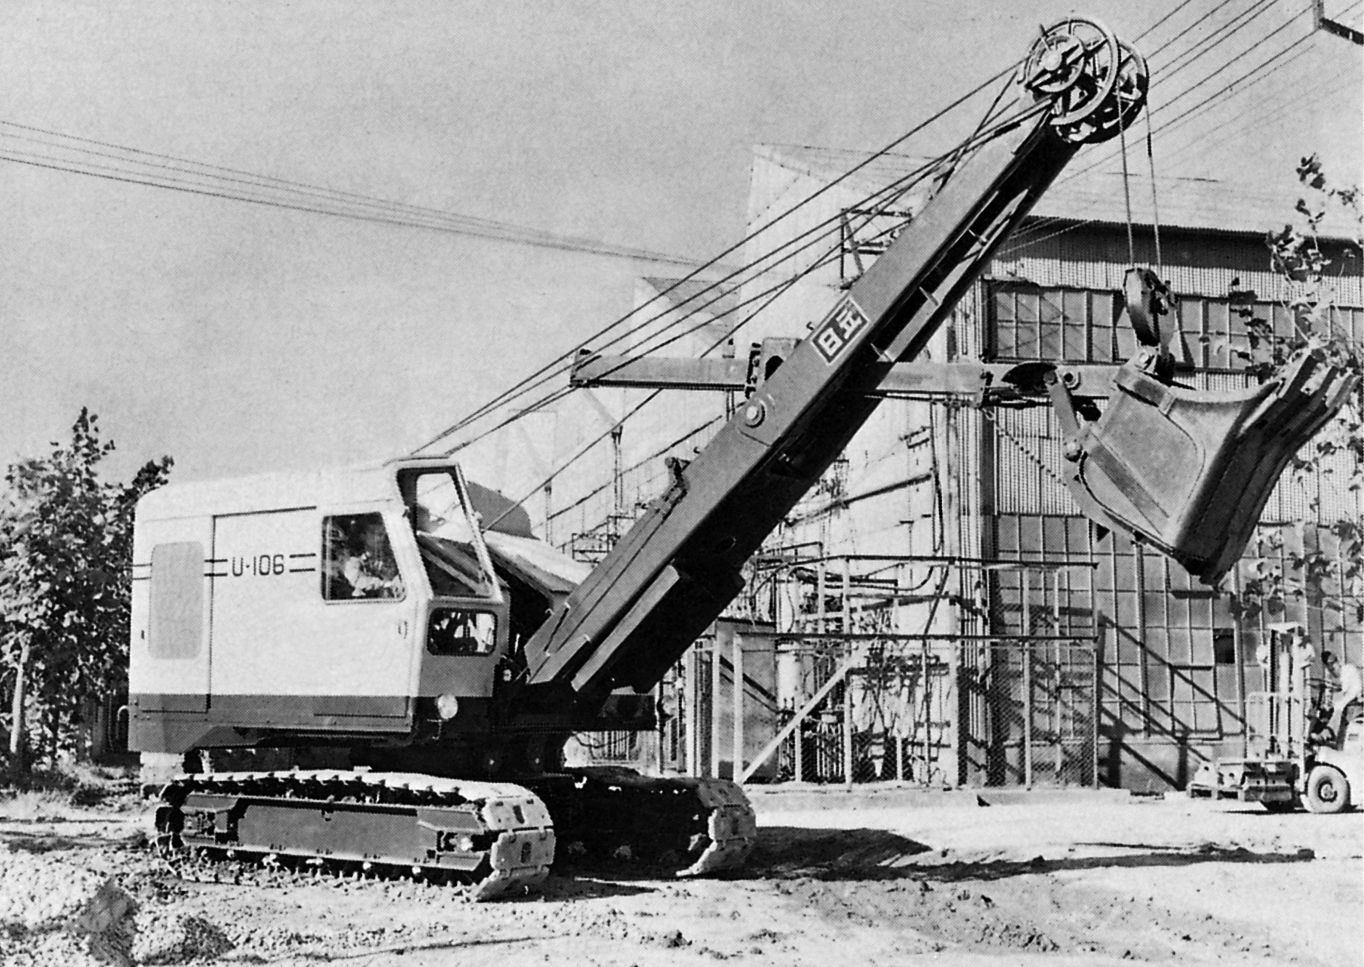 Launched U106 cable-operated shovel, the first in the world to employ fluid couplings.